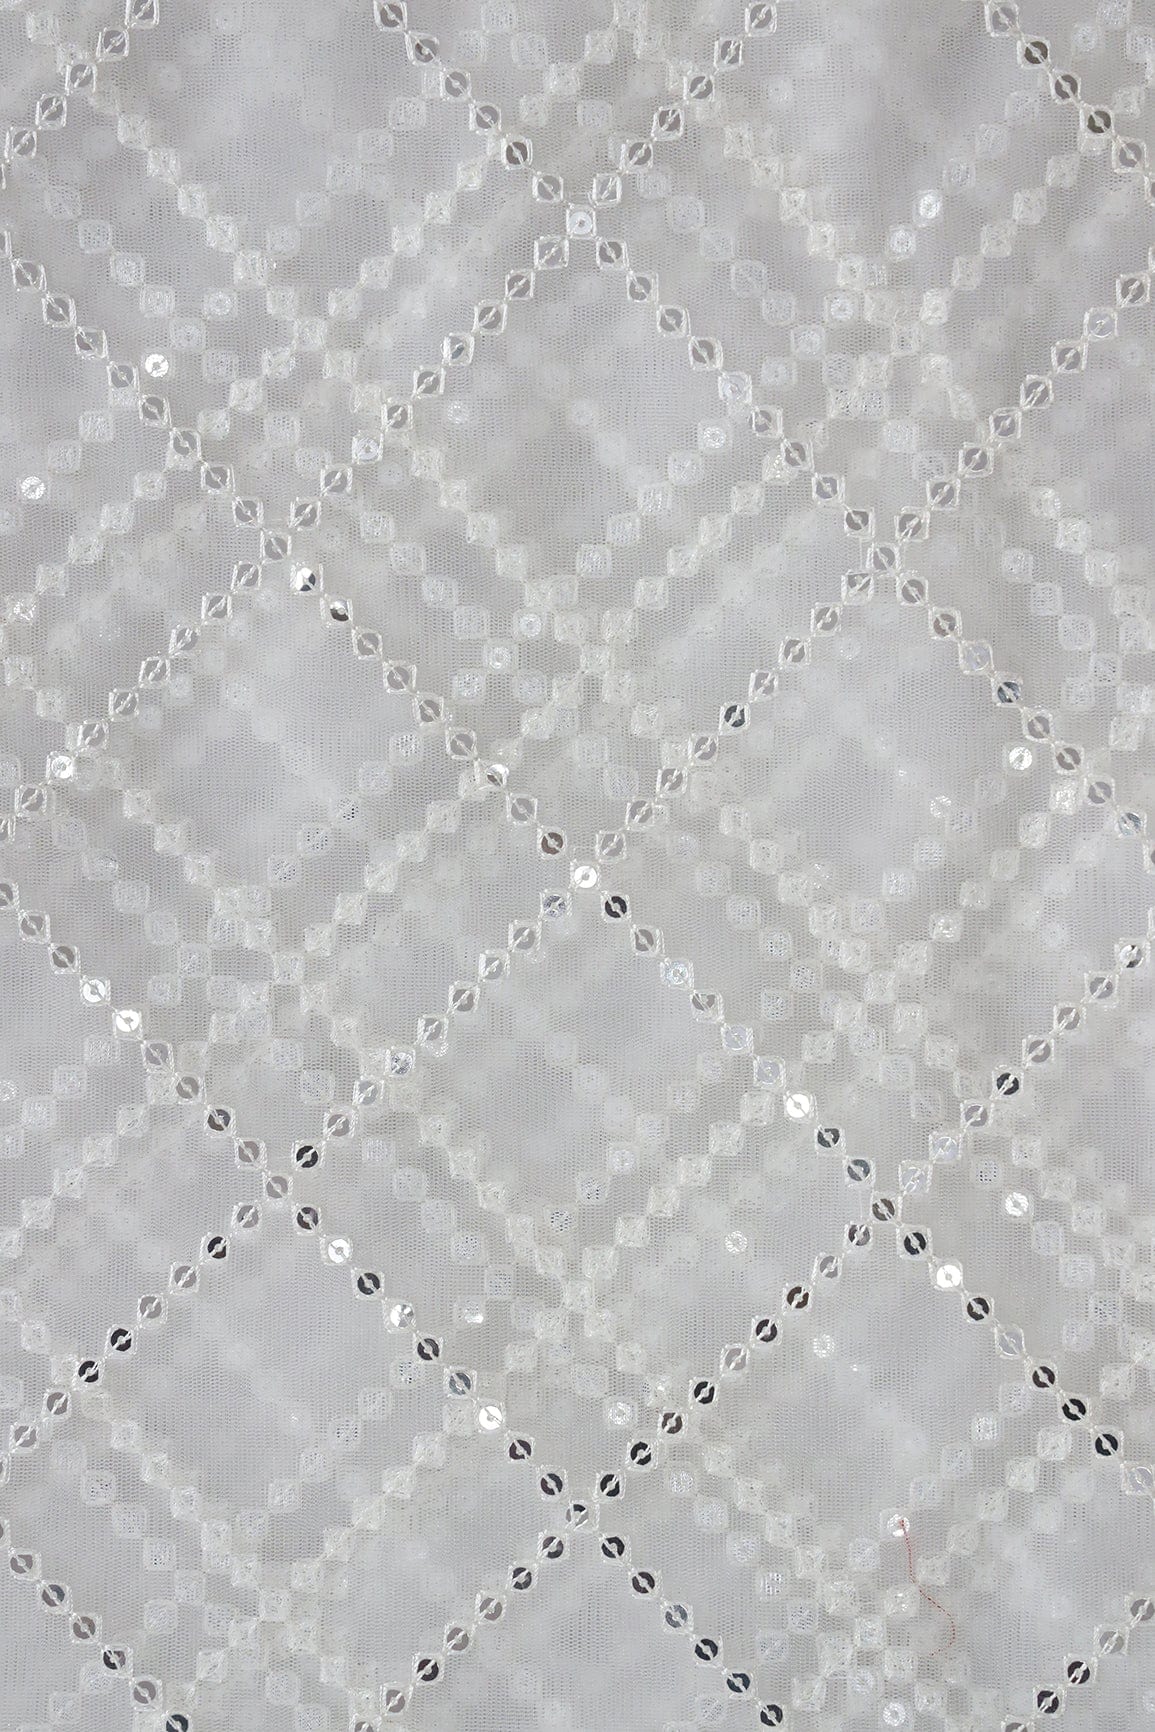 doeraa Embroidery Fabrics Silver Sequins With Thread Checks Embroidery Work On White Soft Net Fabric